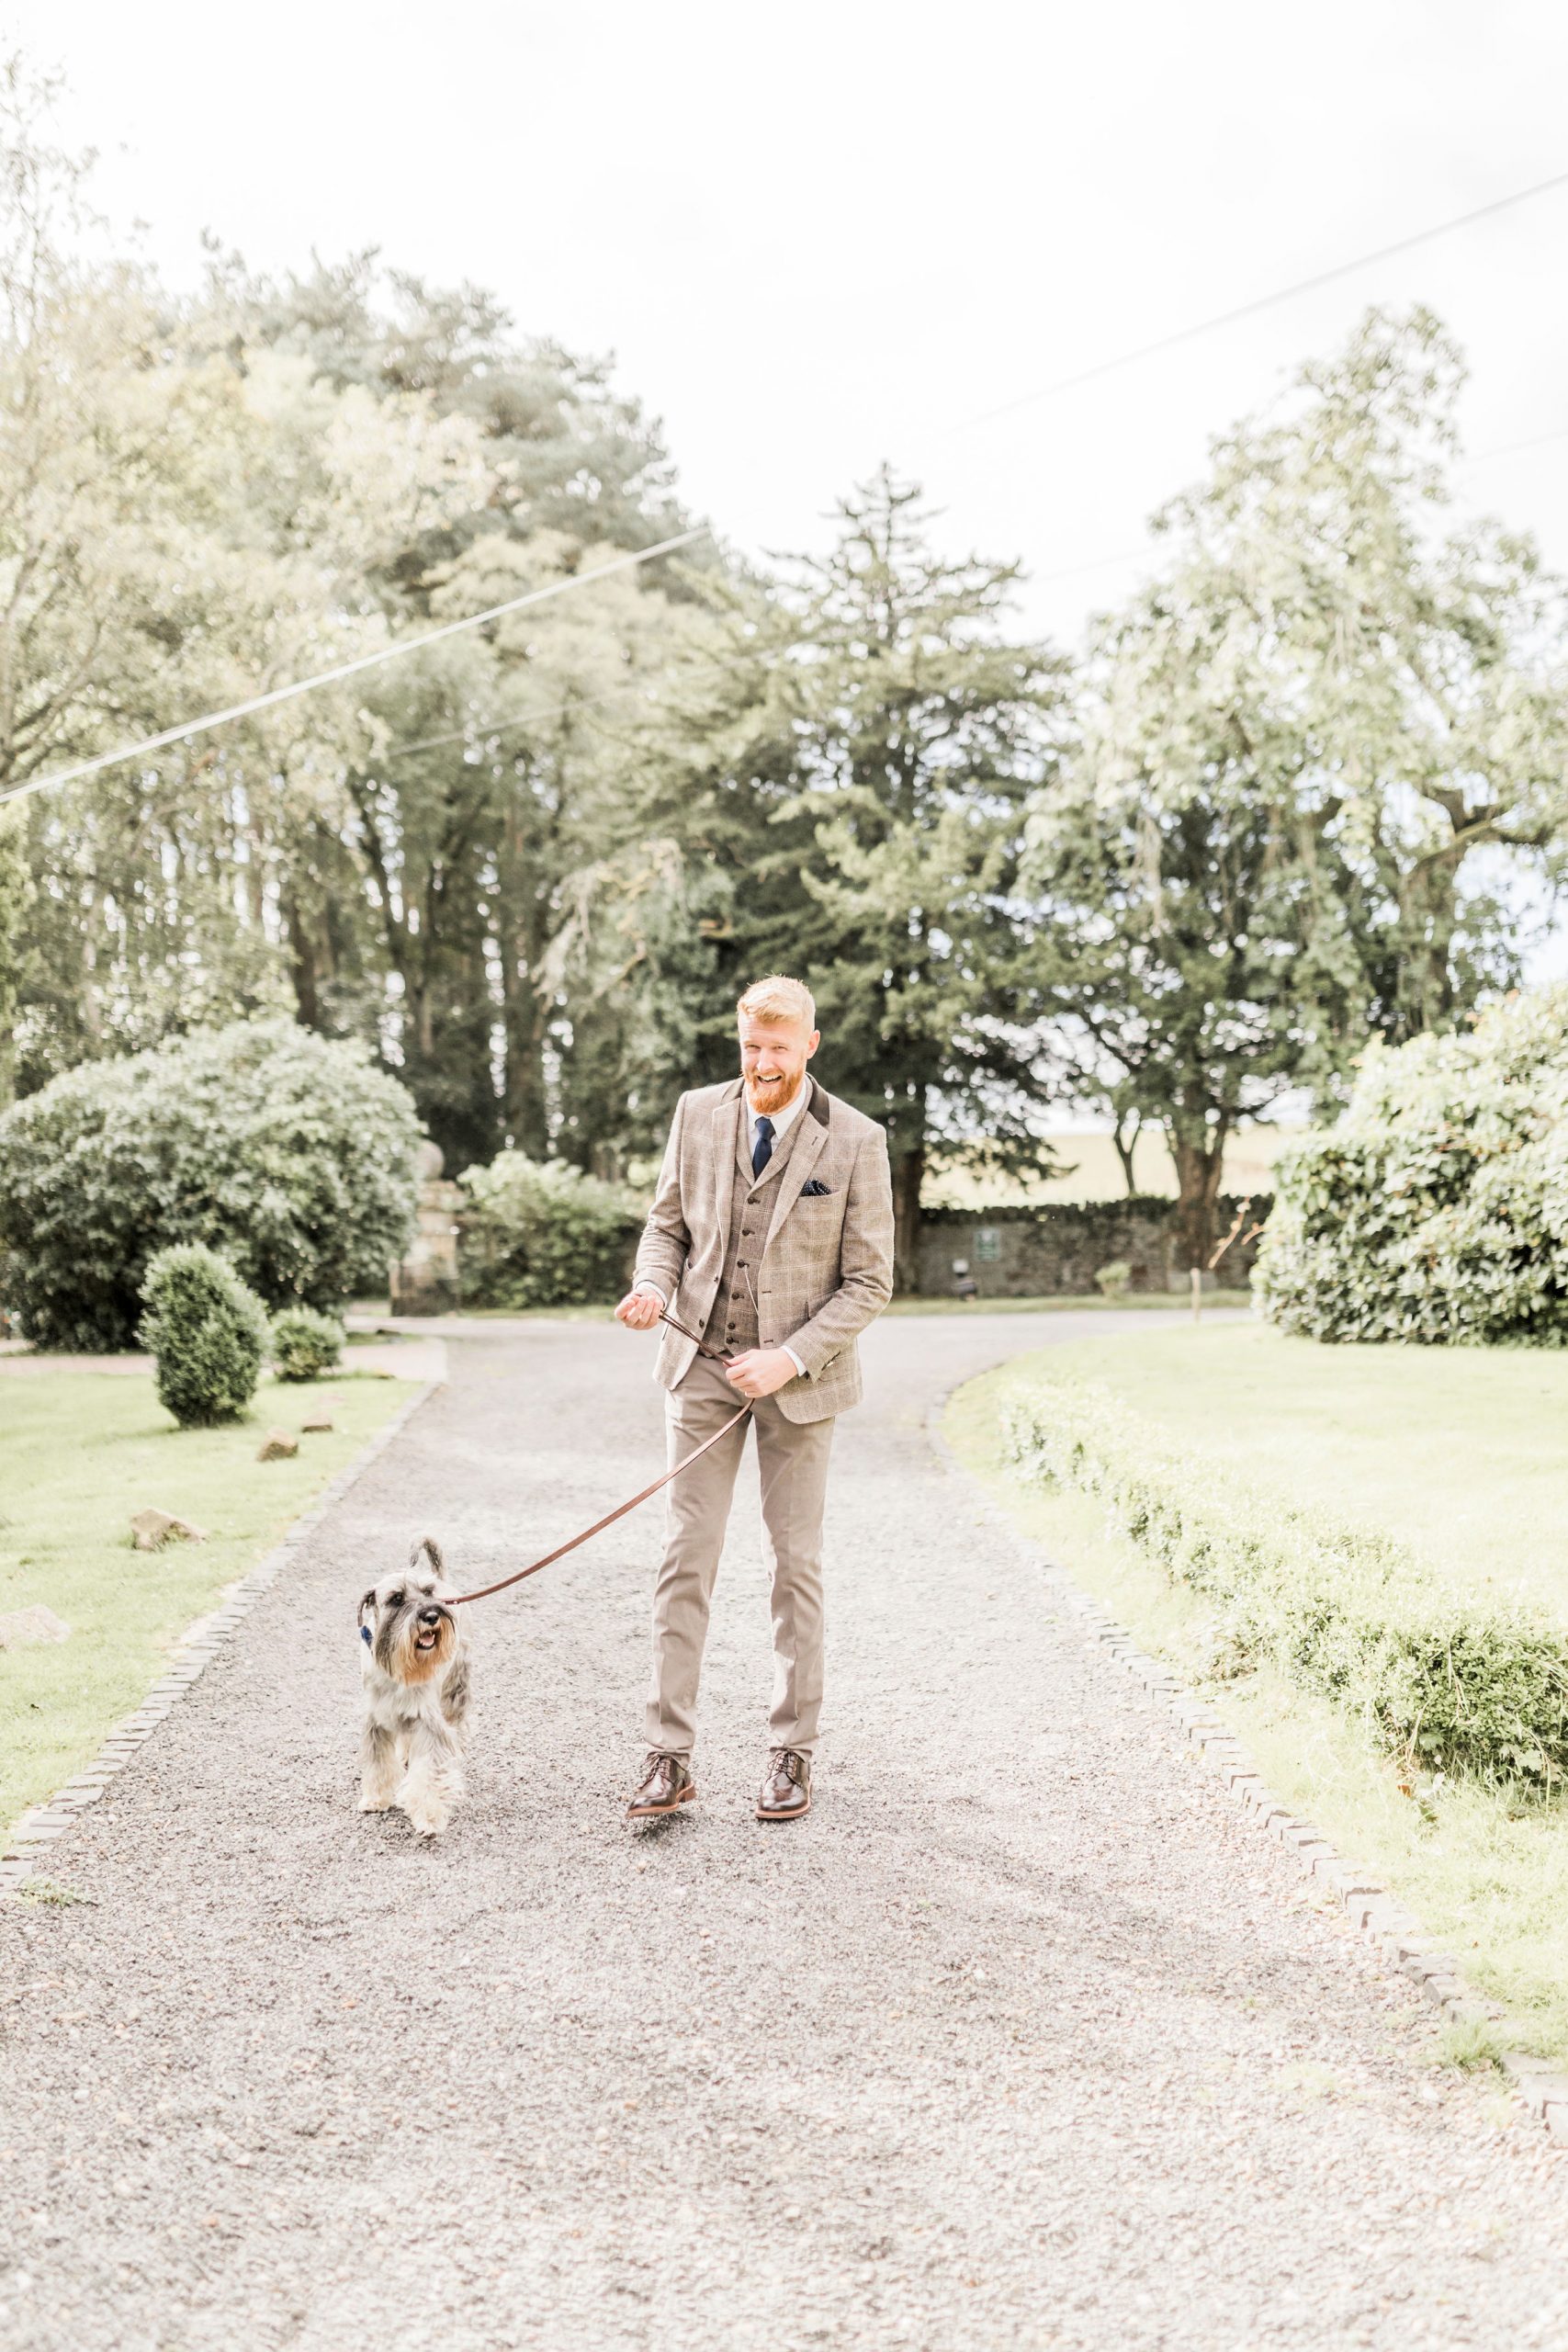 Wedding At Woodhill Hall, Northumberland - Kayleigh and Paul - Katy Melling Photography